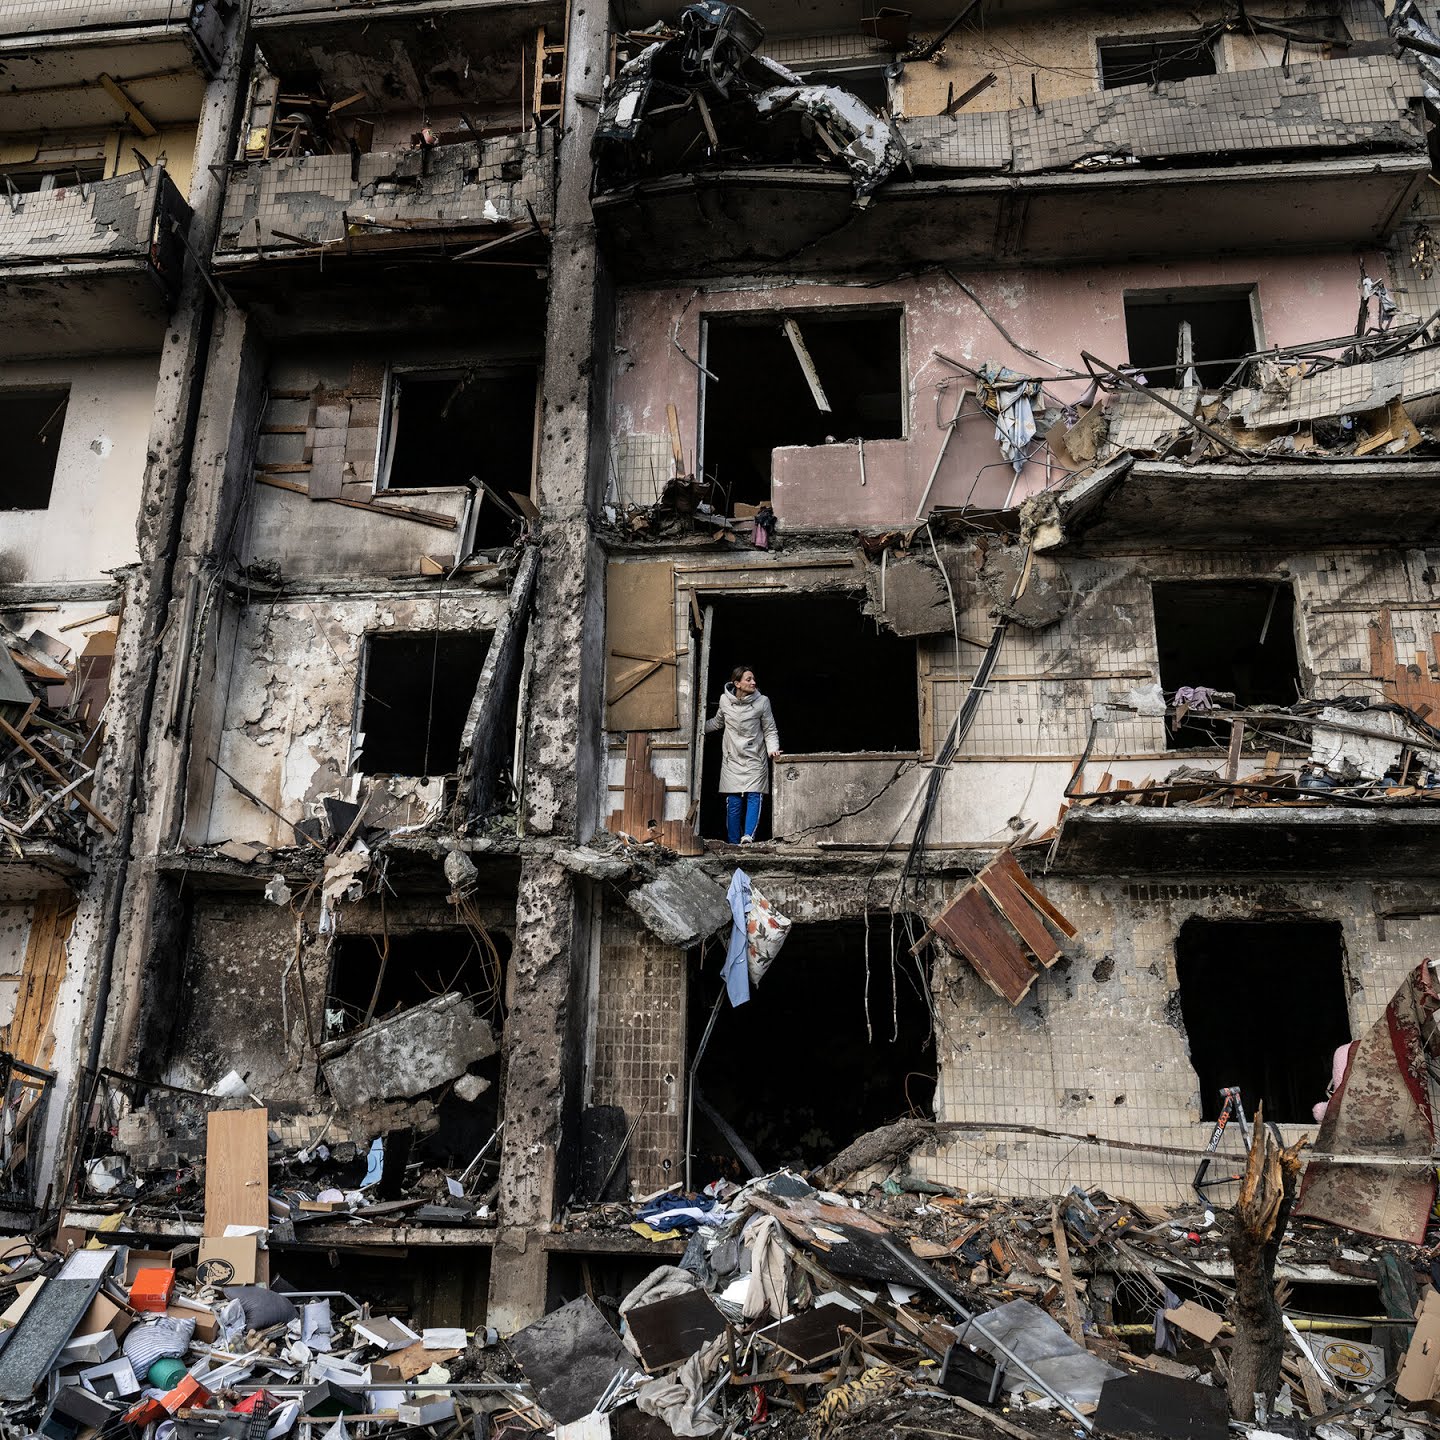 The scene after a residential building was hit by missiles in Kyiv, Ukraine, on Friday.